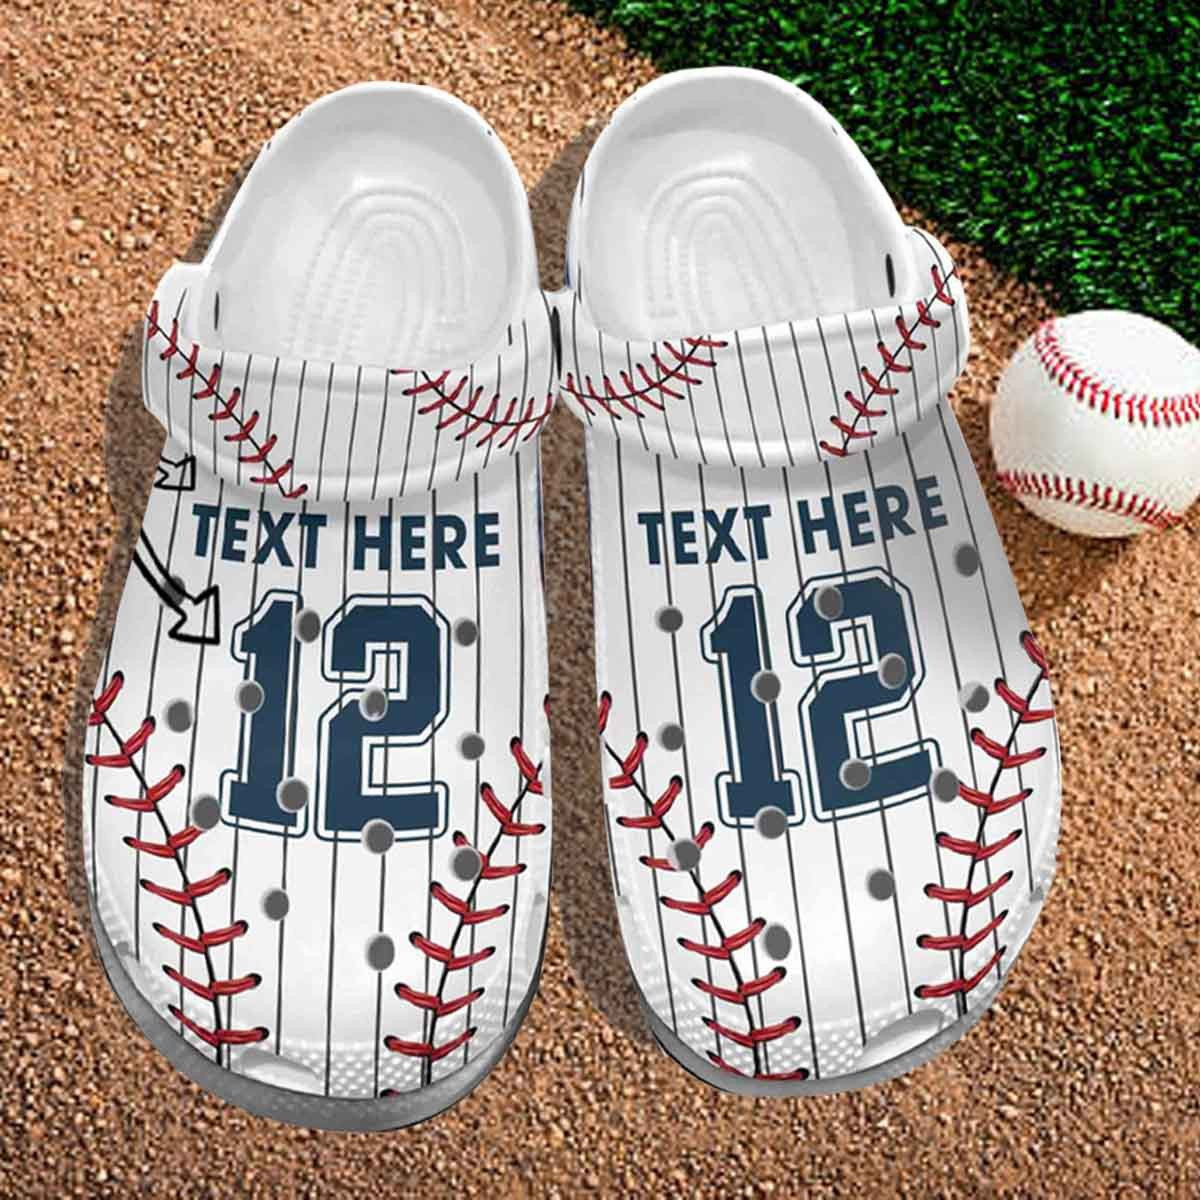 Baseball Uniform Player Crocs Shoes Clogs For Batter - Funny Baseball Personalized Shoes Birthday Gifts Son Daughter